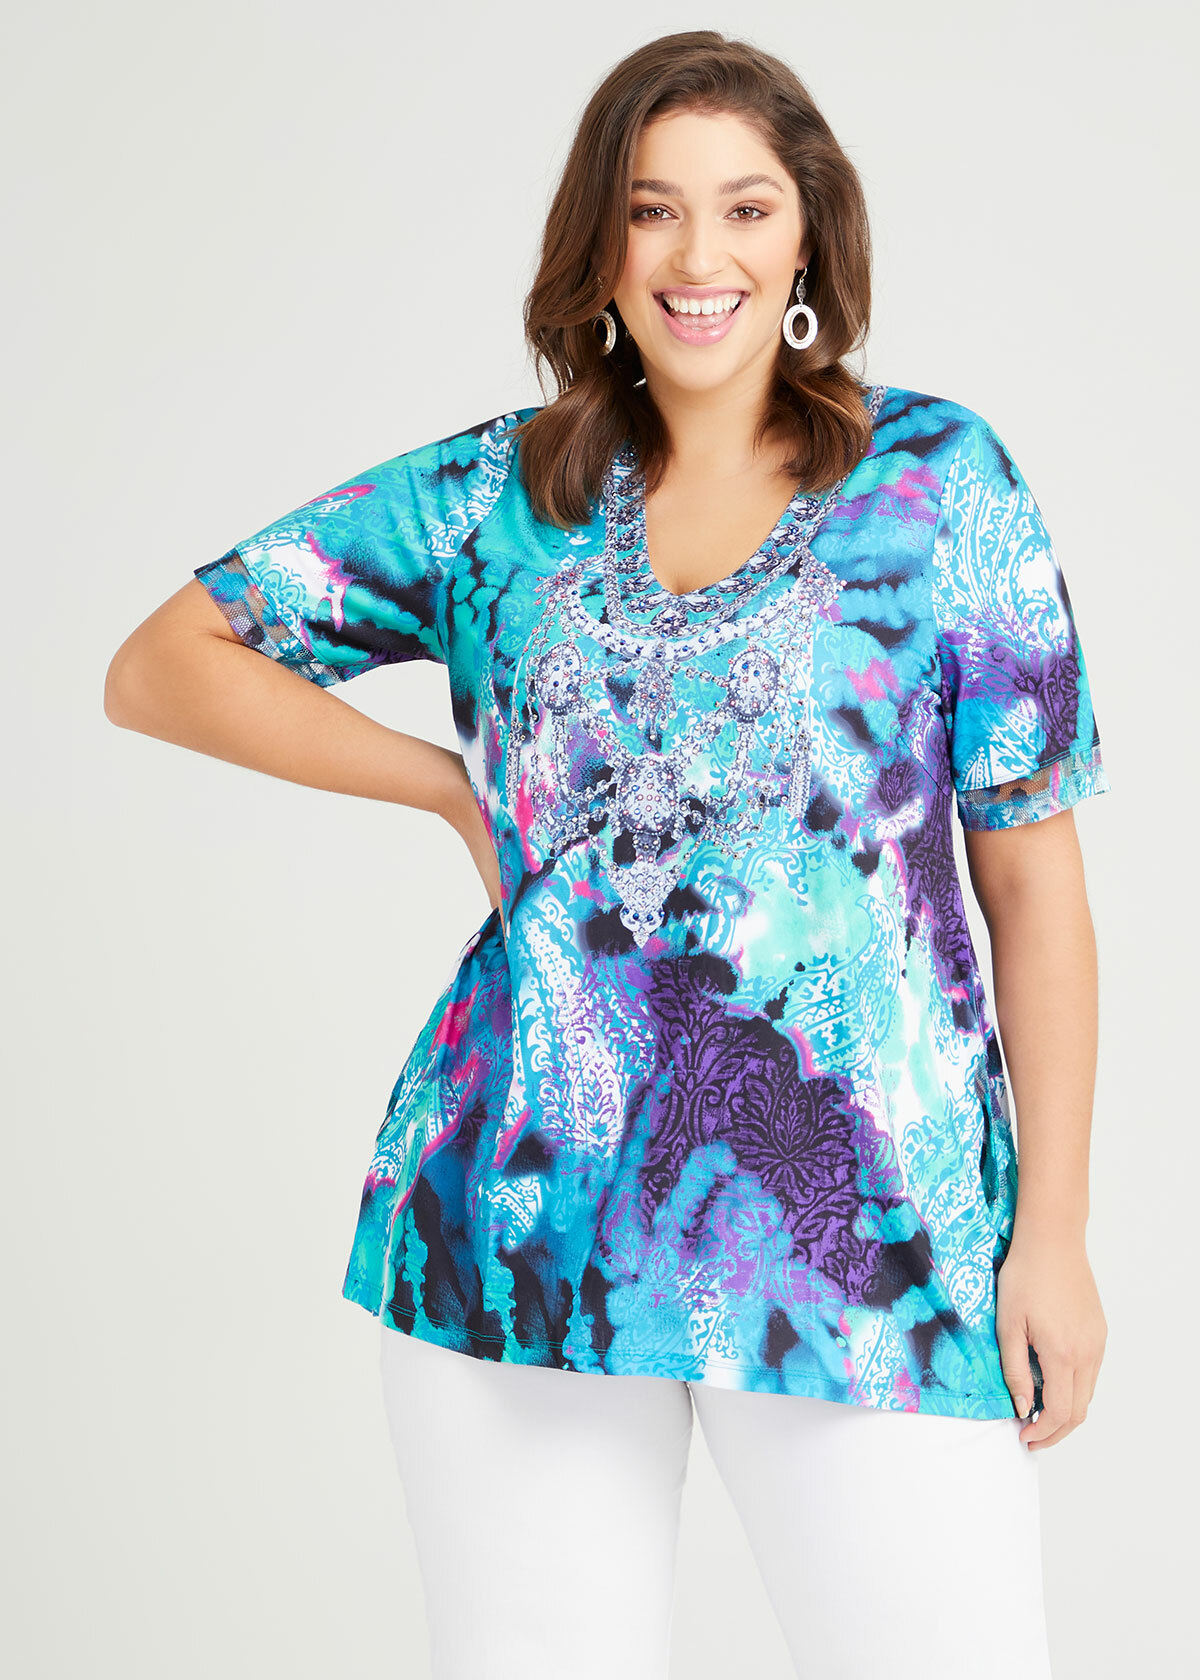 Solstice Sparkle Top in Print in sizes 12 to 30 | Taking Shape UK